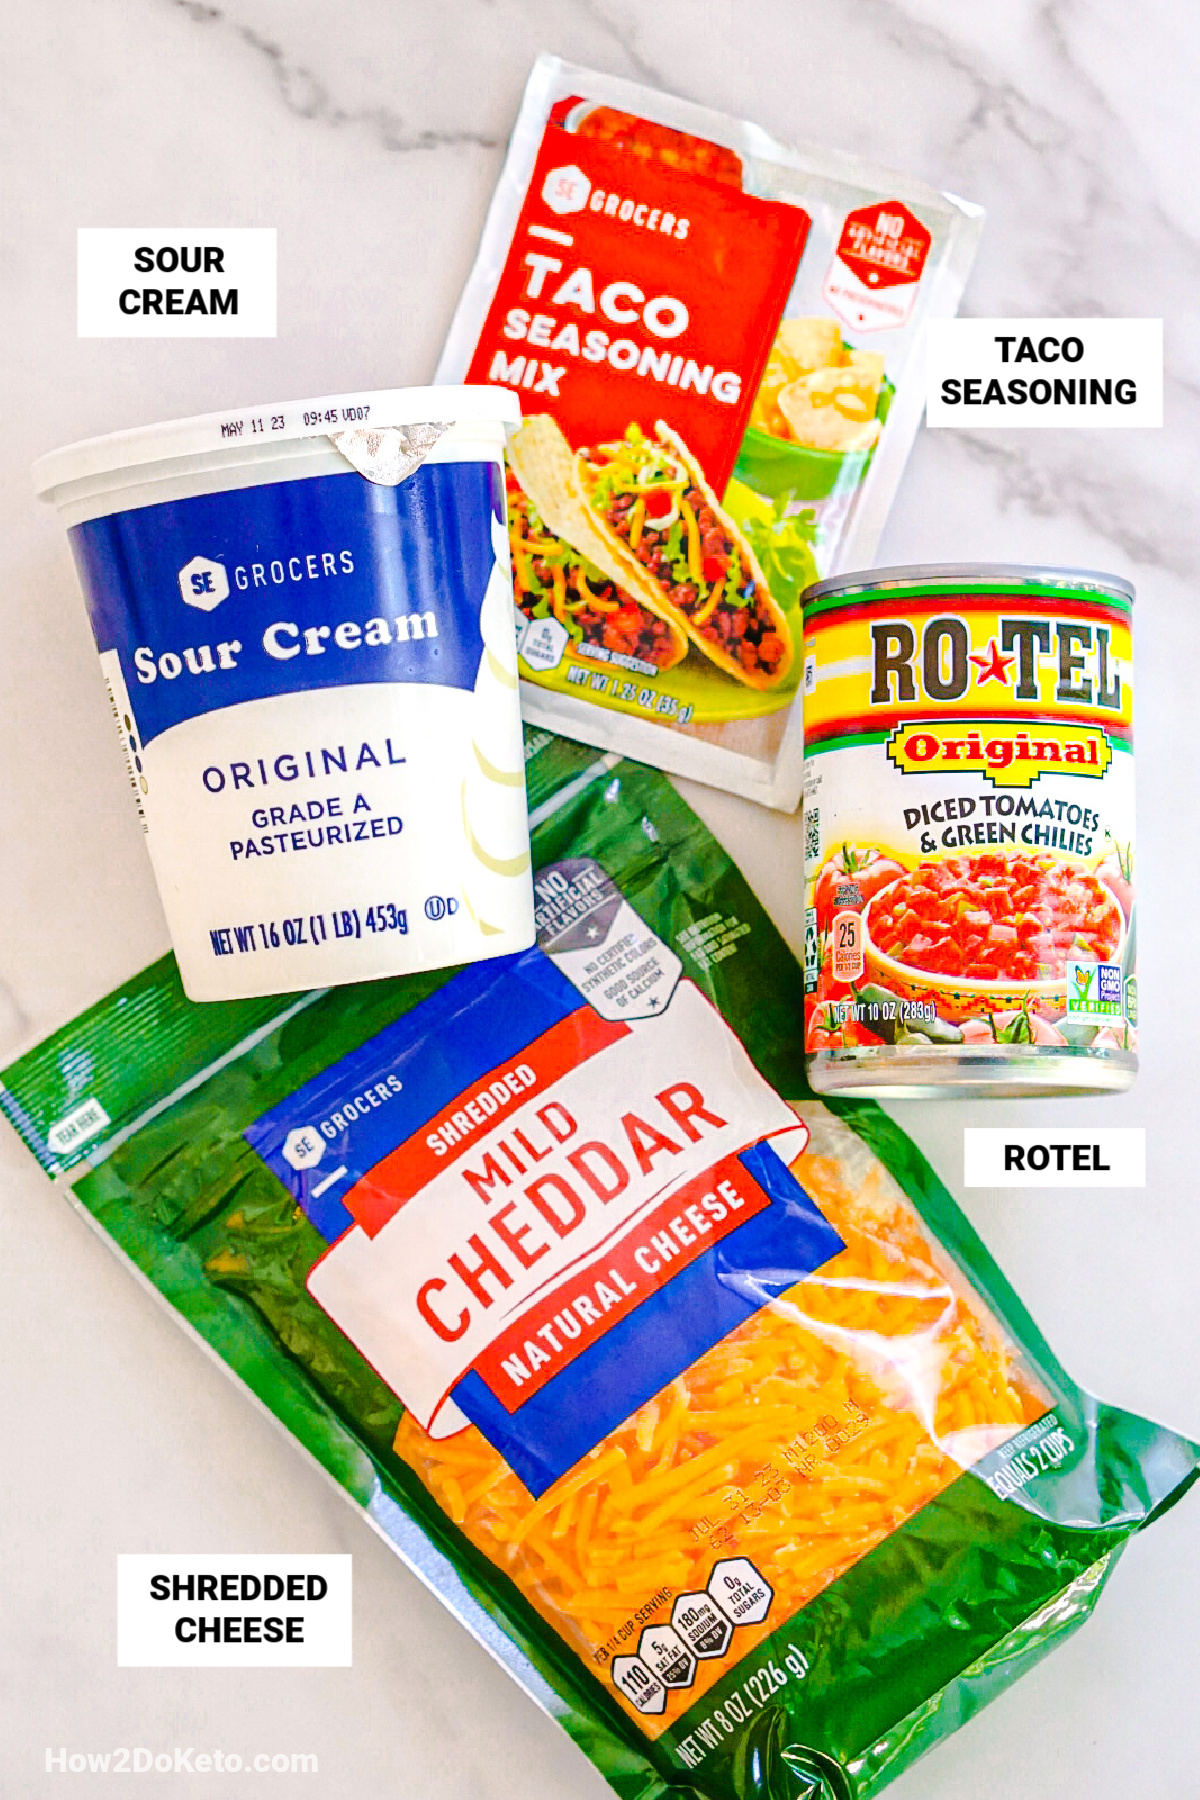 "Boat Dip" ingredients, with text labels: sour cream, taco seasoning, rotel, shredded cheese